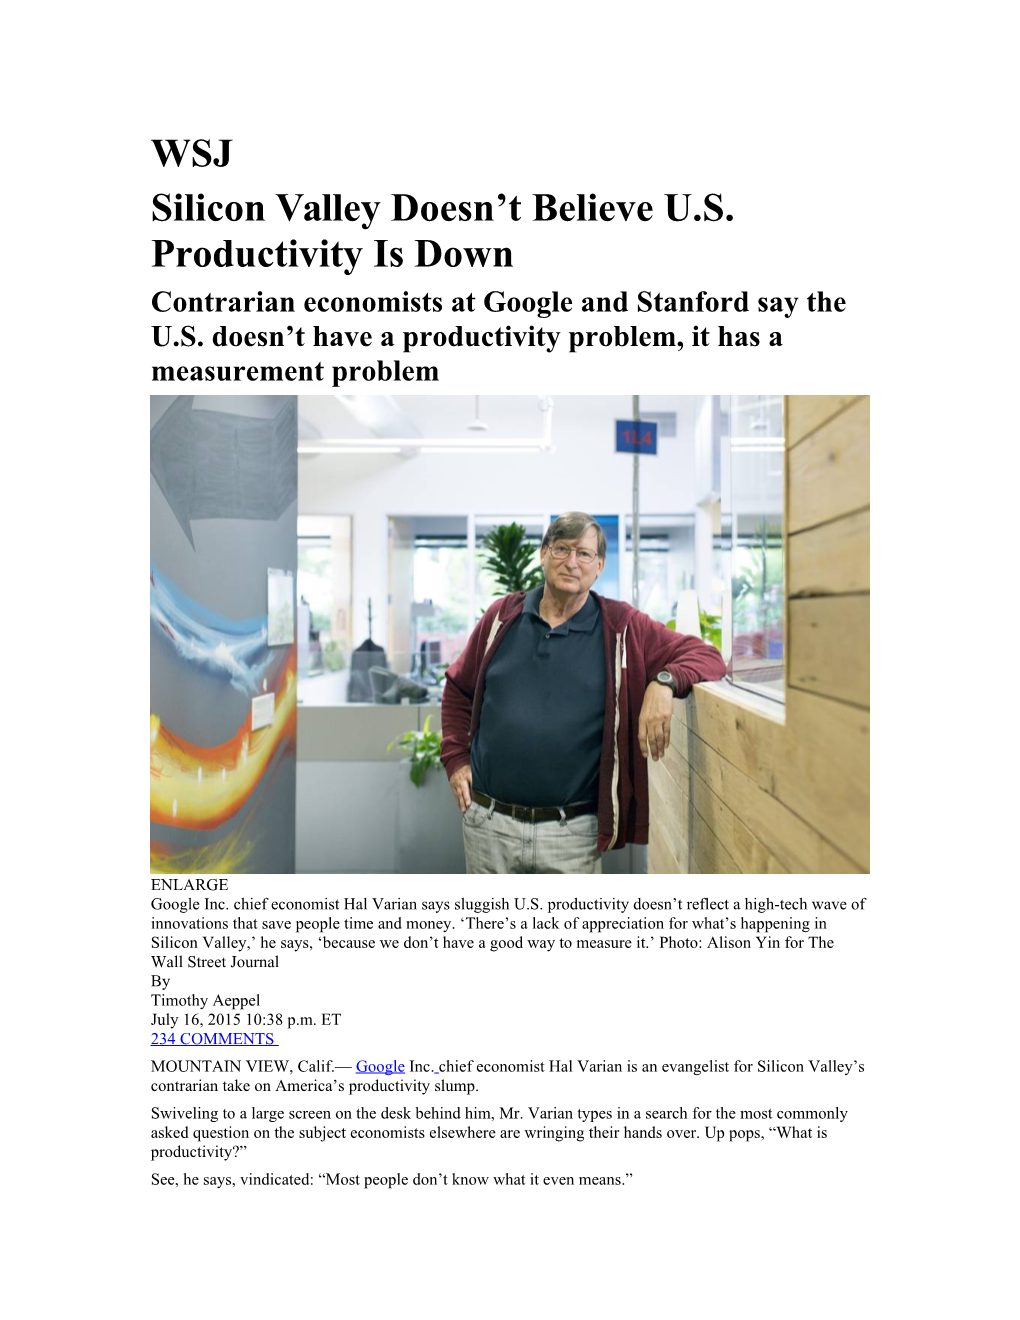 Silicon Valley Doesn T Believe U.S. Productivity Is Down